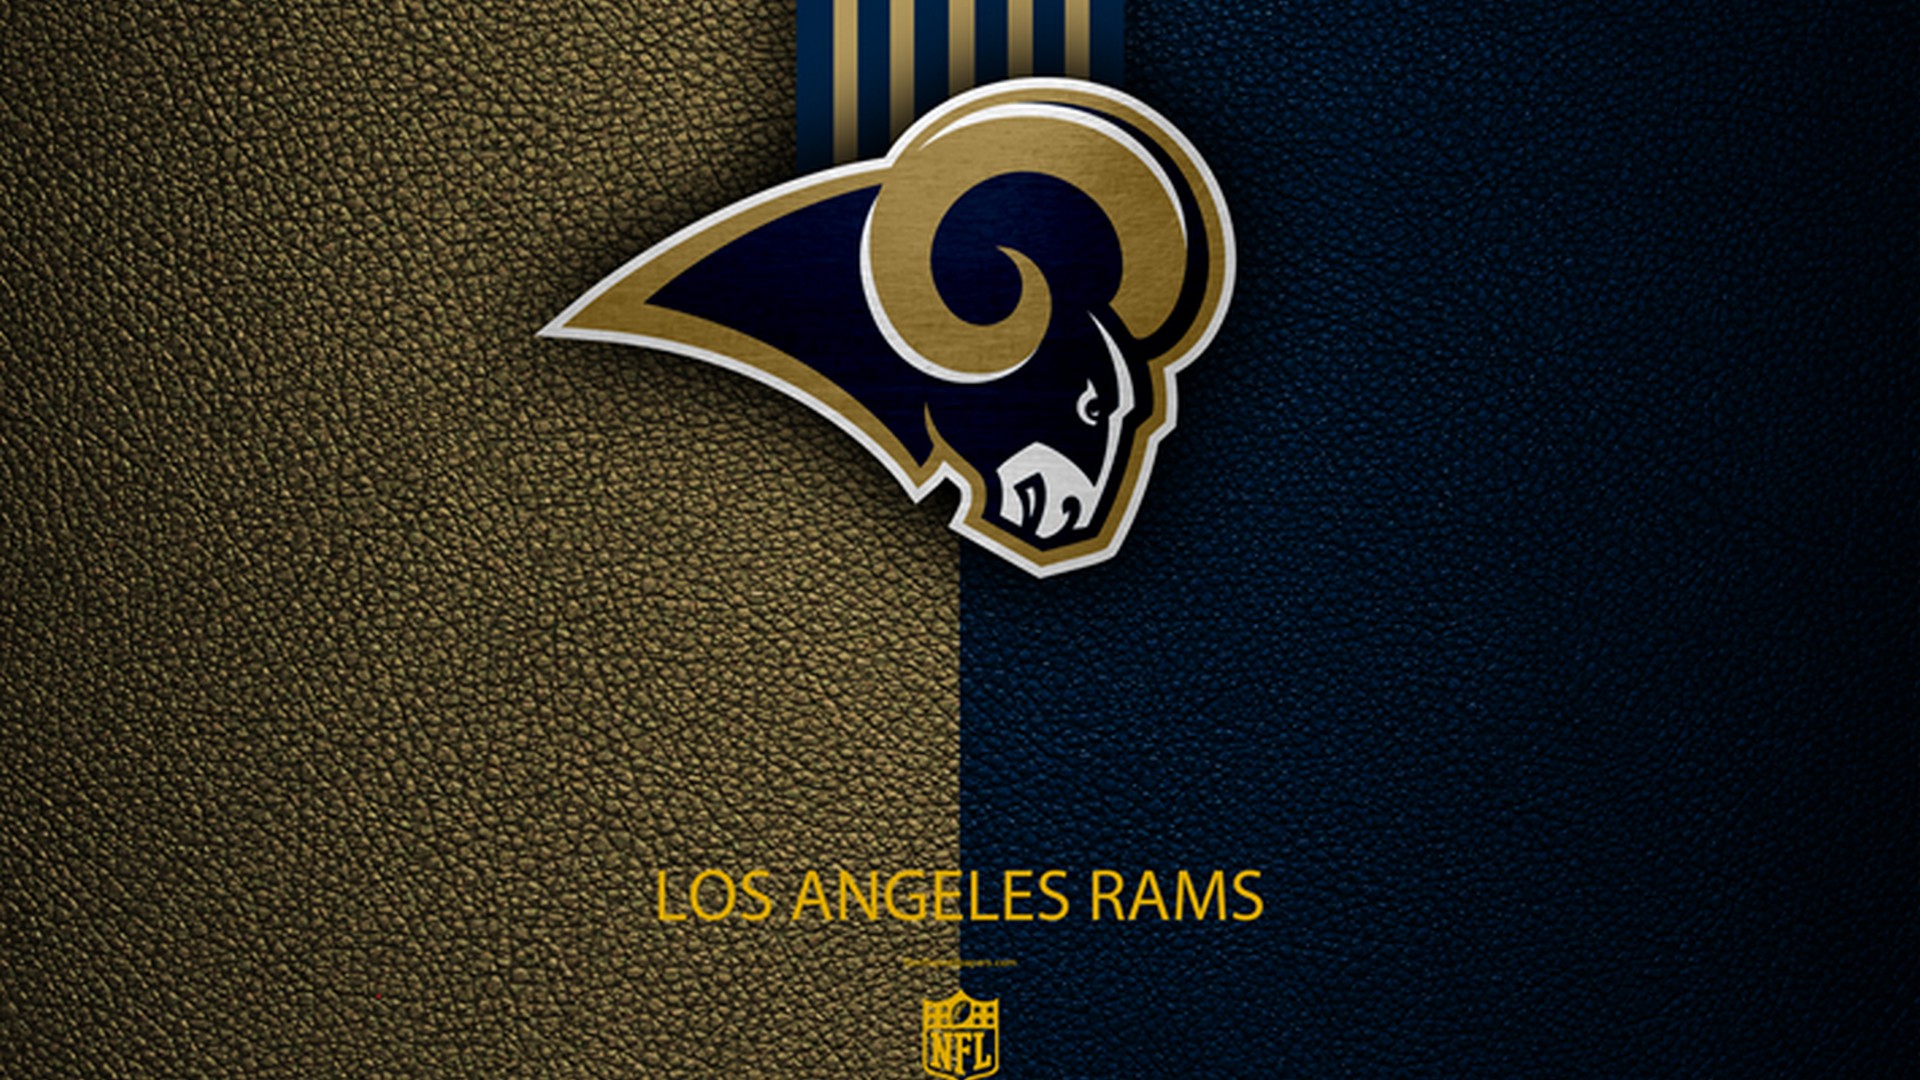 Wallpapers Los Angeles Rams with resolution 1920x1080 pixel. You can make this wallpaper for your Mac or Windows Desktop Background, iPhone, Android or Tablet and another Smartphone device